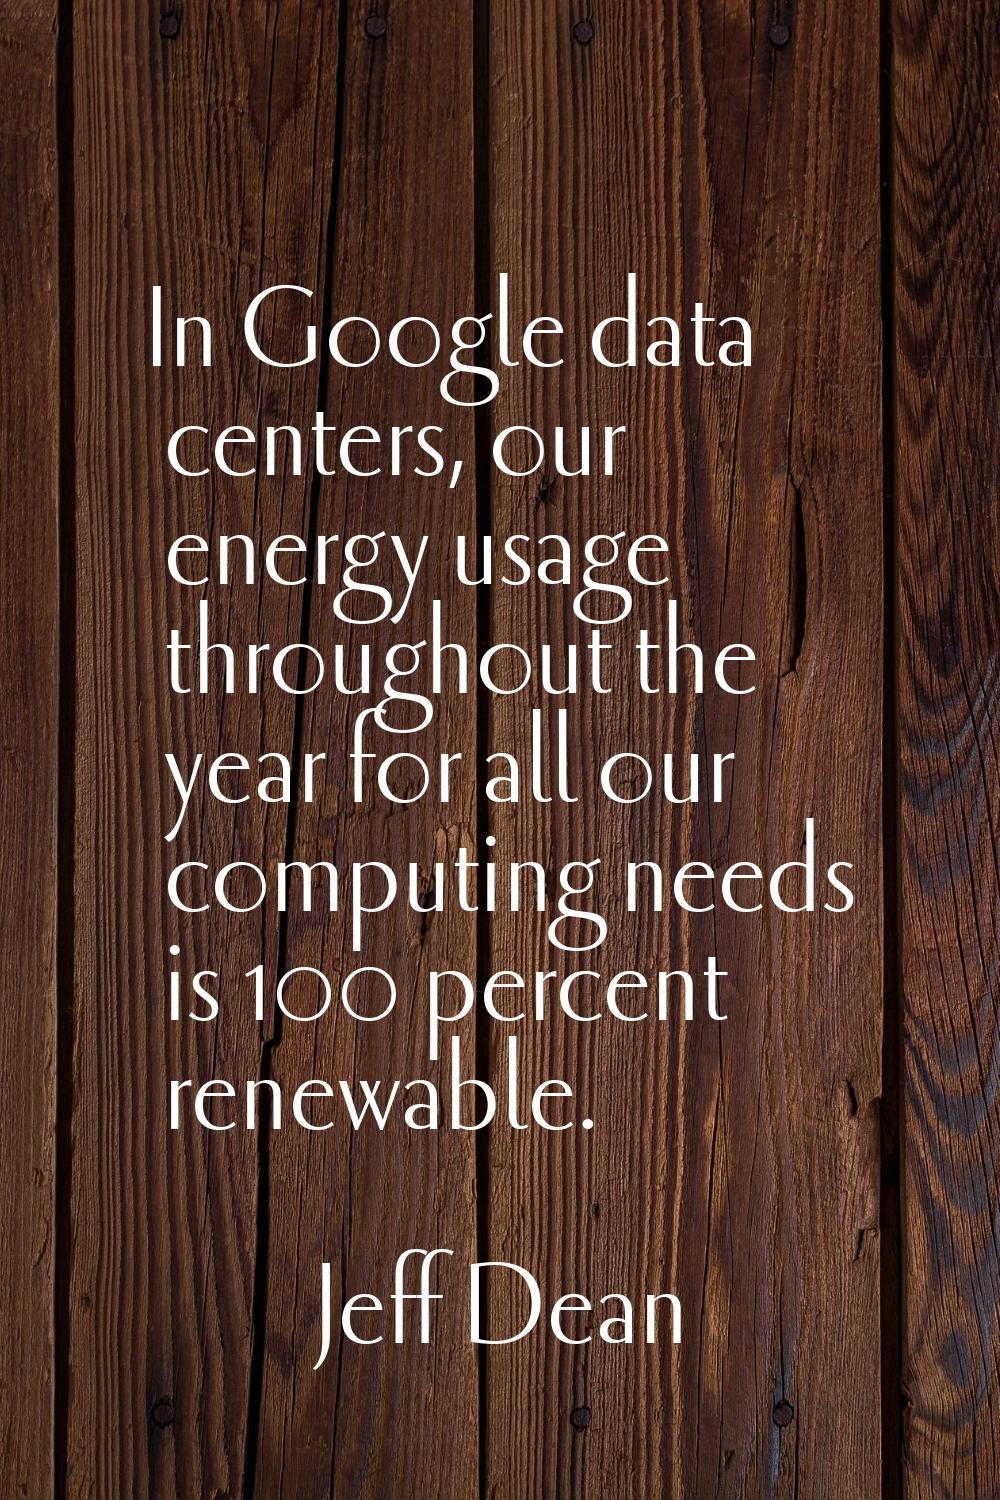 In Google data centers, our energy usage throughout the year for all our computing needs is 100 per